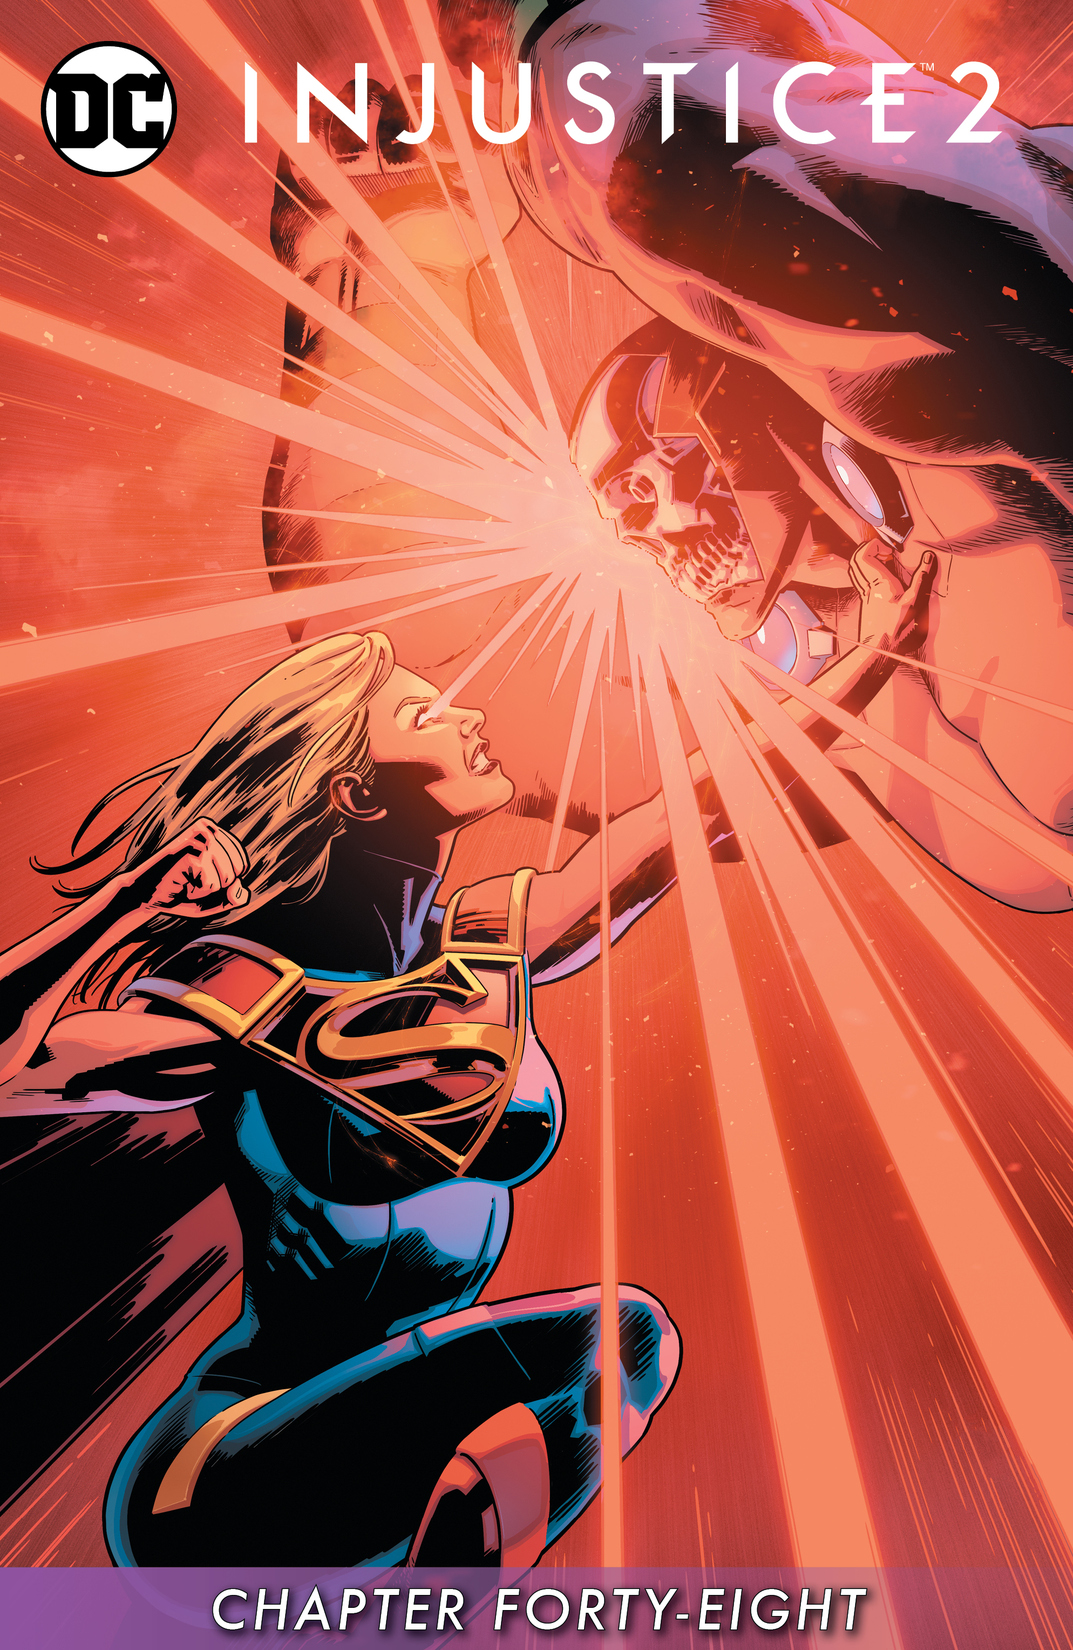 Injustice 2 #48 preview images